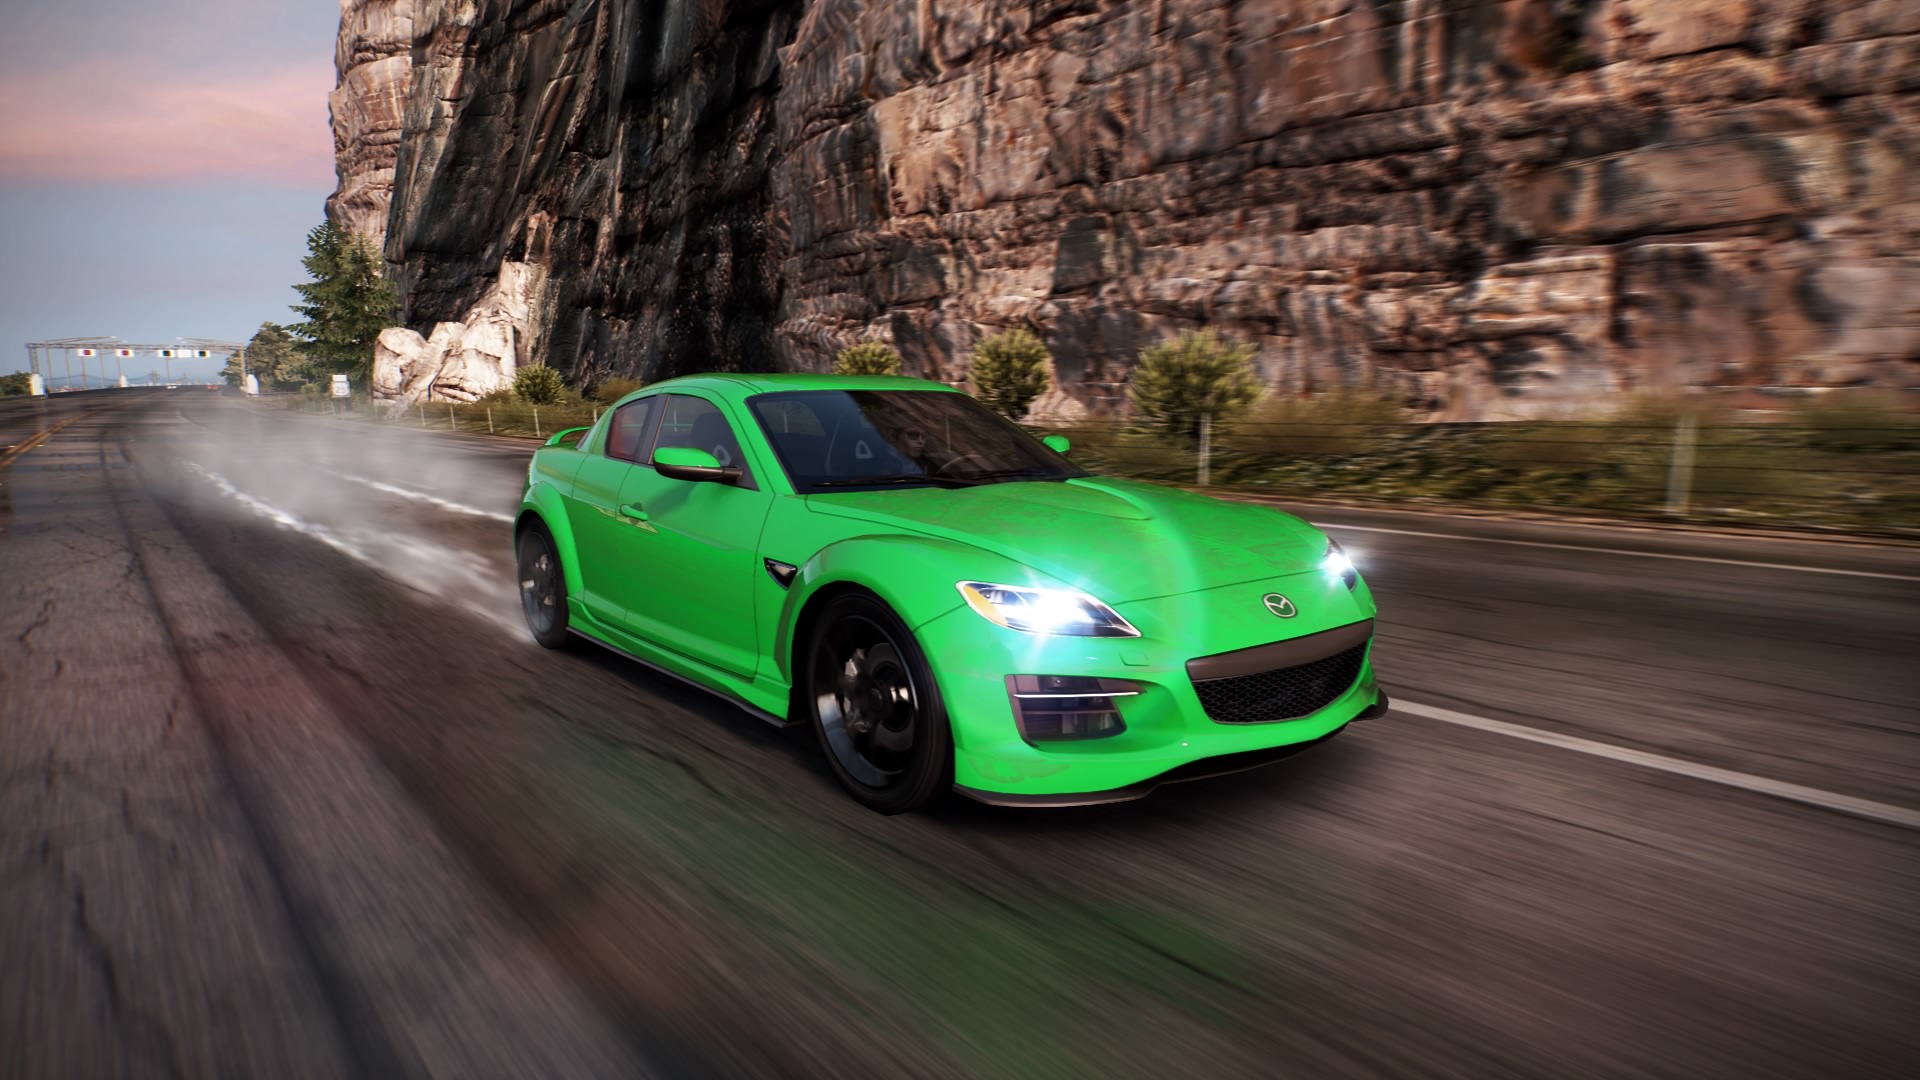 General 1920x1080 Need for Speed: Hot Pursuit car green Mazda RX-8 PlayStation 4 screen shot